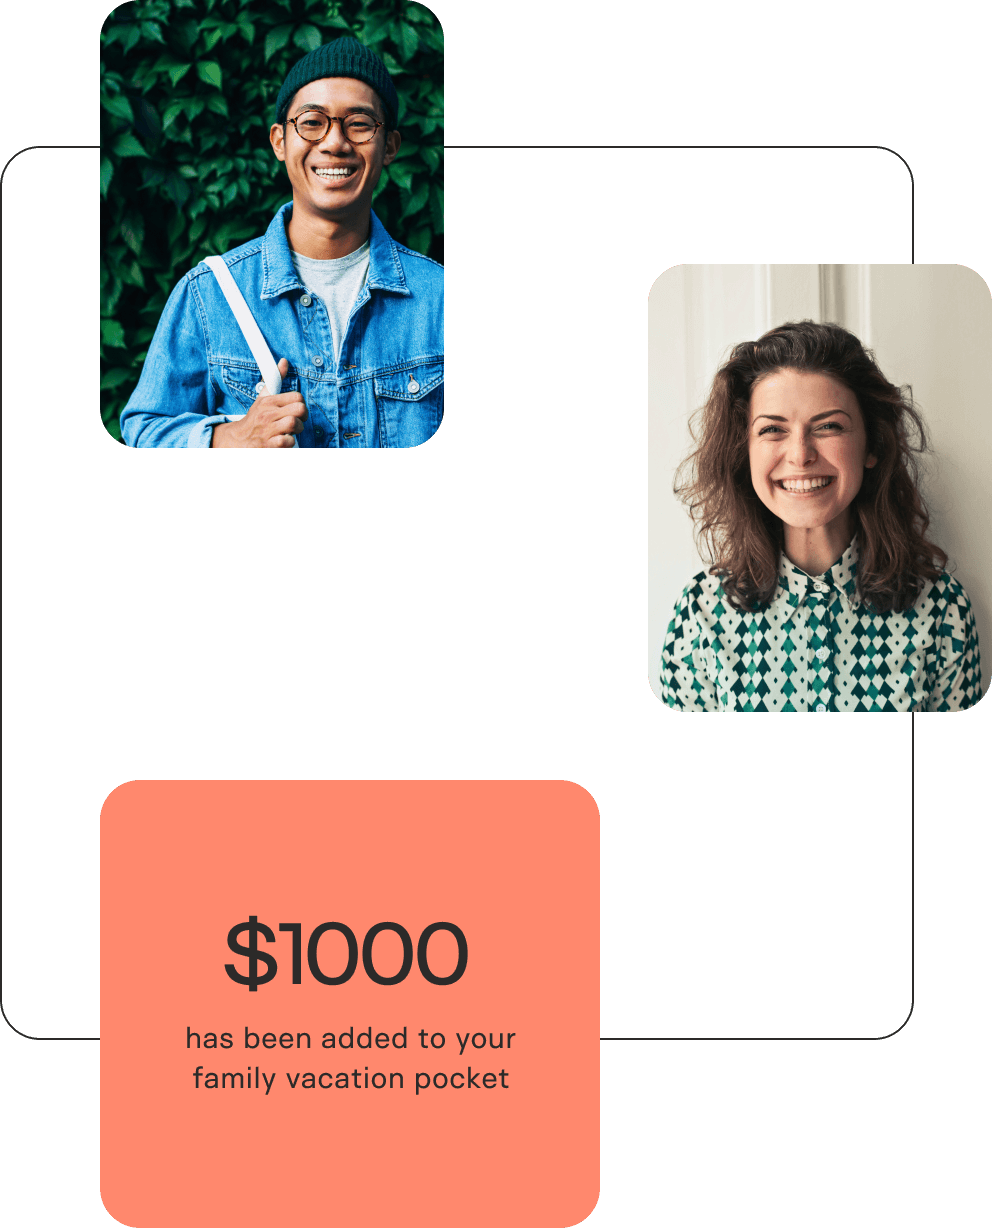 With Pockets, you can track, save, and send money in groups